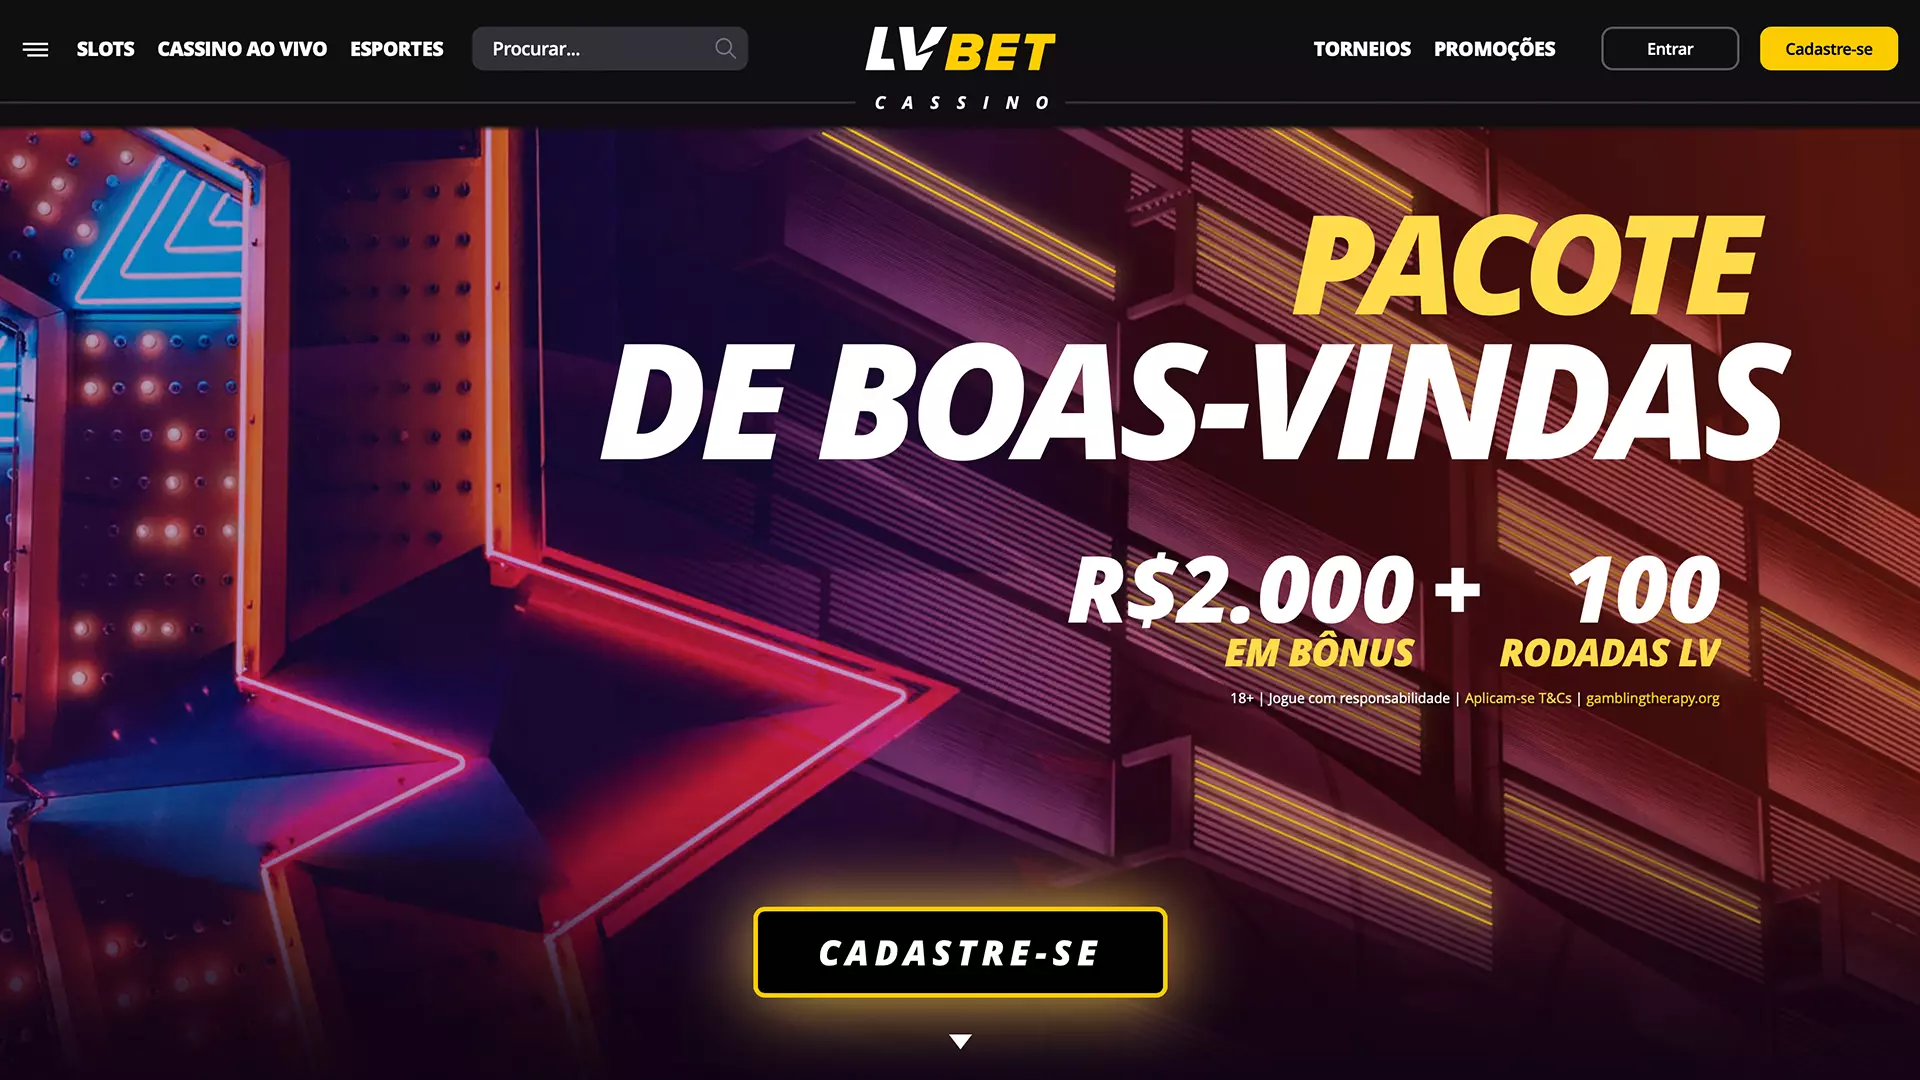 Get Rid of Grandpashabet Casino: Real Casino Atmosphere with Live Dealers Once and For All